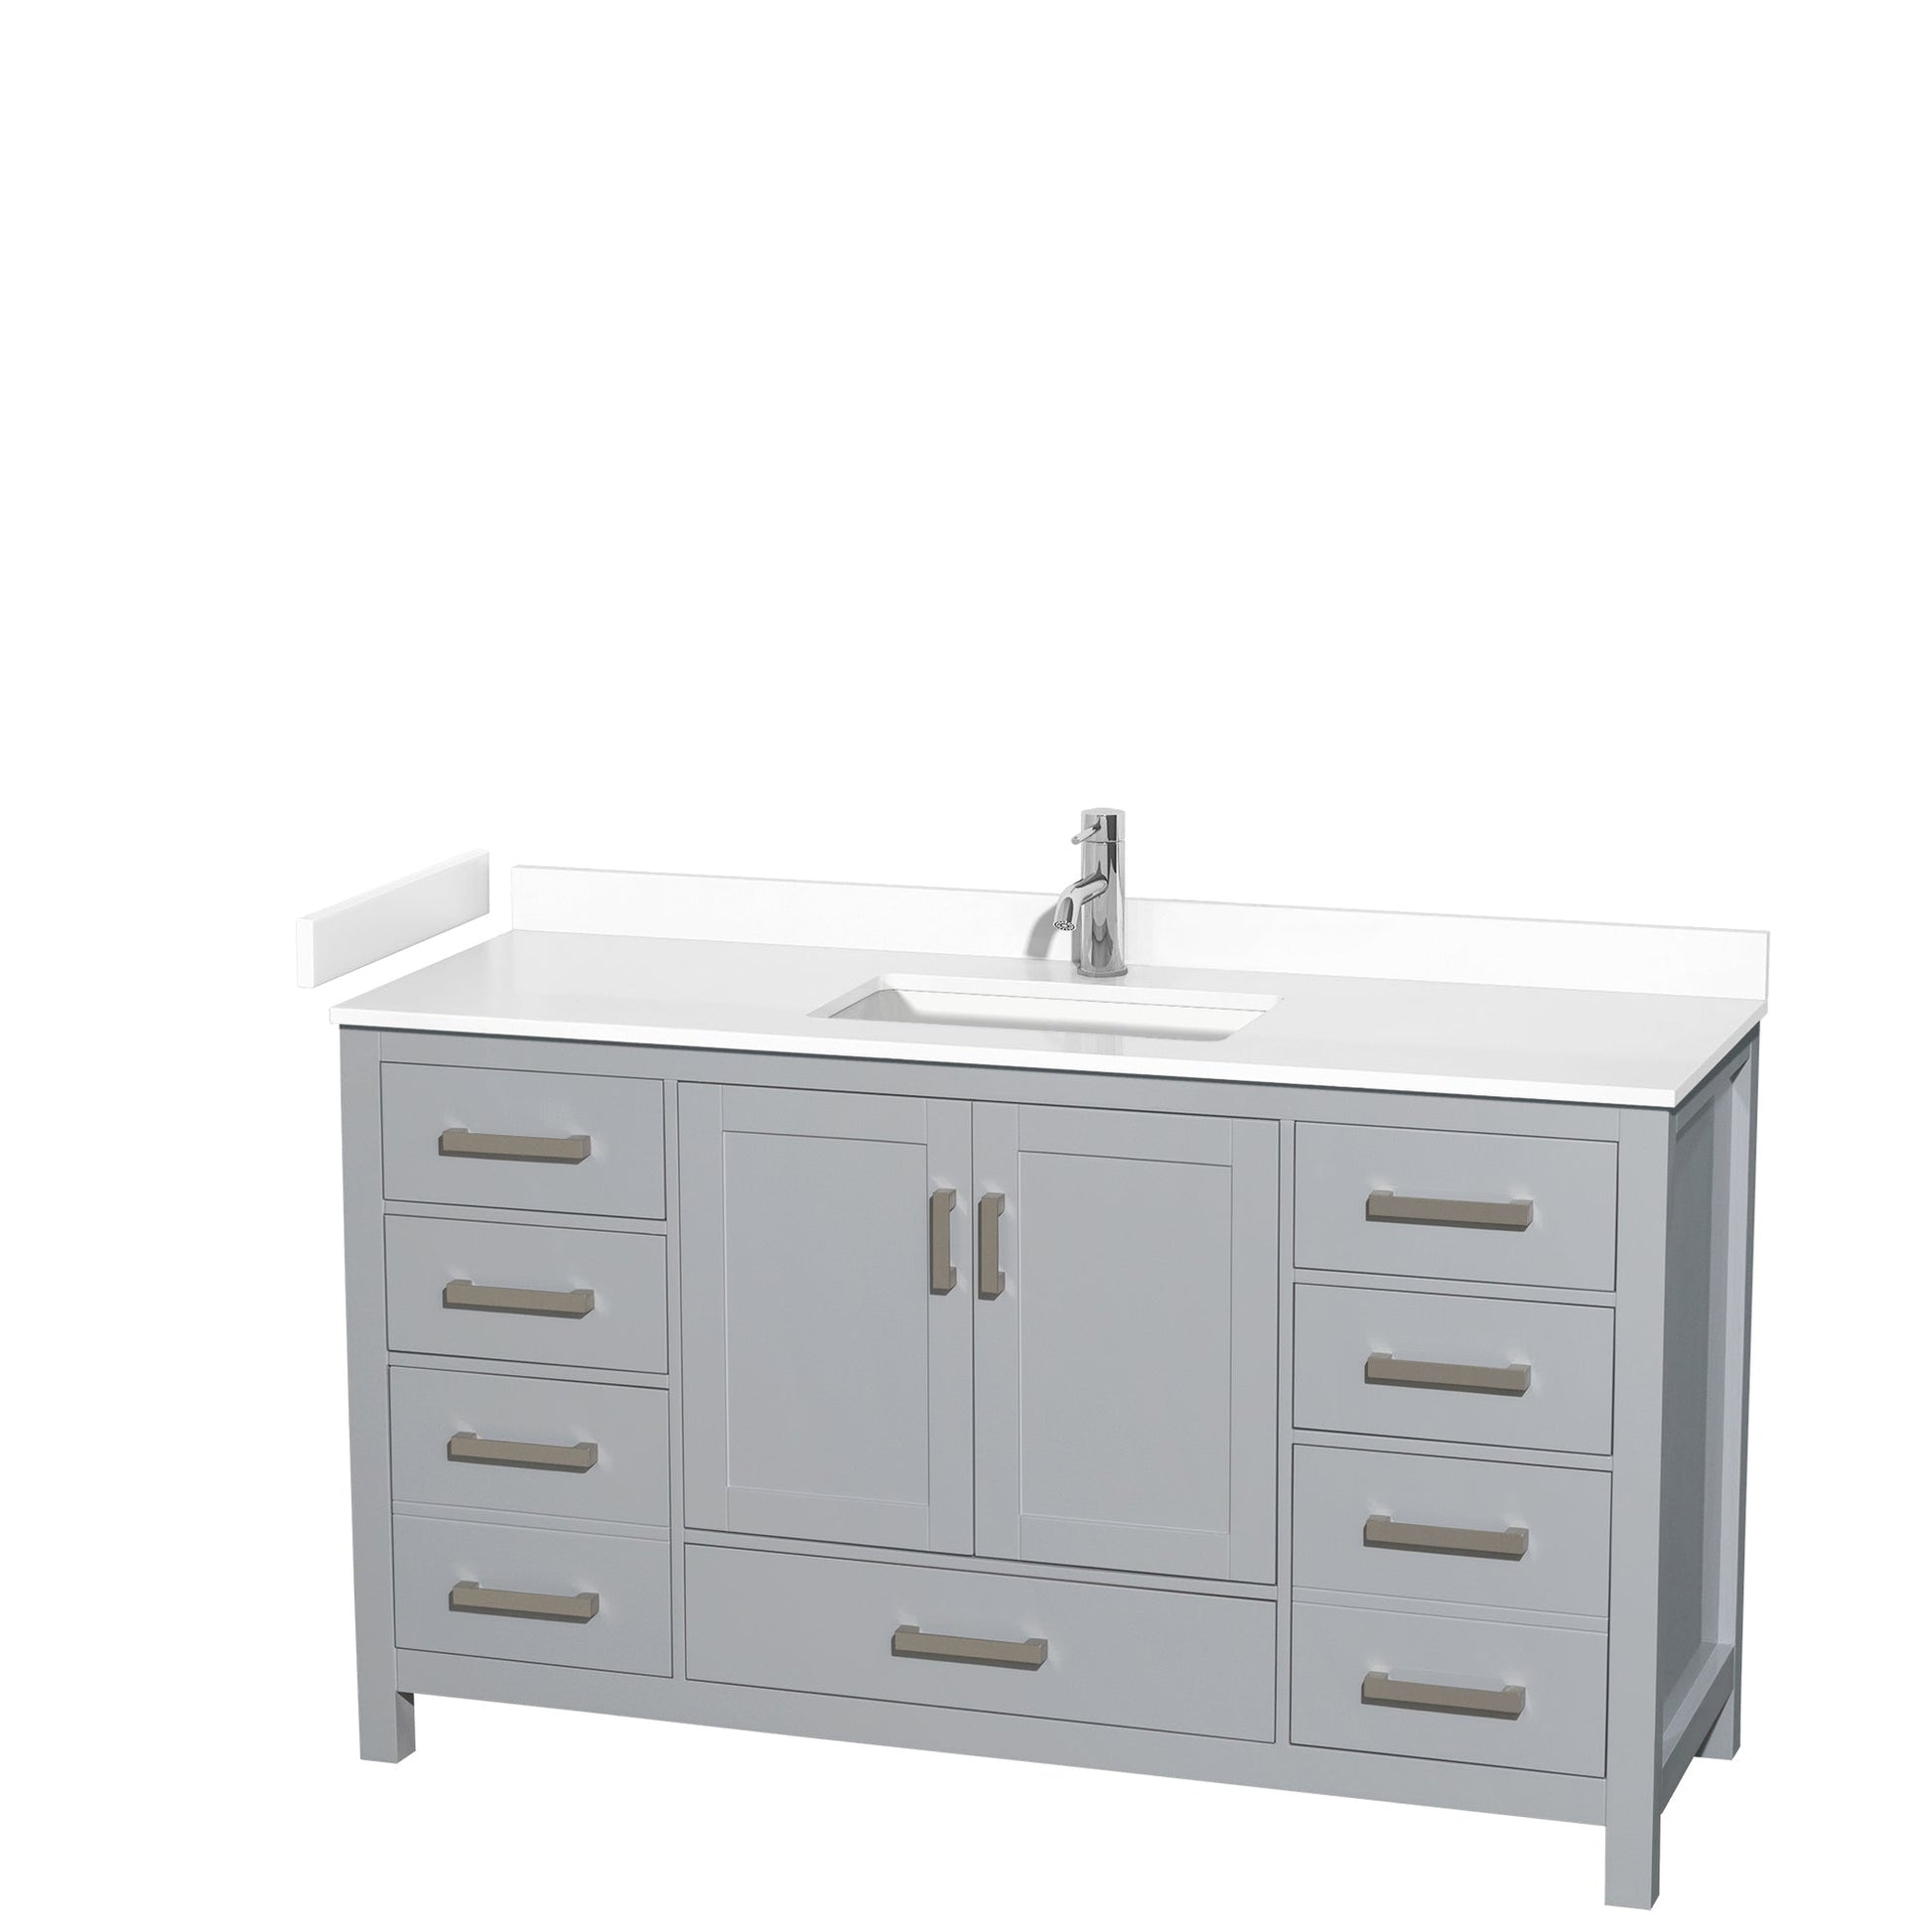 Wyndham Collection Sheffield 60" Single Bathroom Vanity in Gray, White Cultured Marble Countertop, Undermount Square Sink, No Mirror